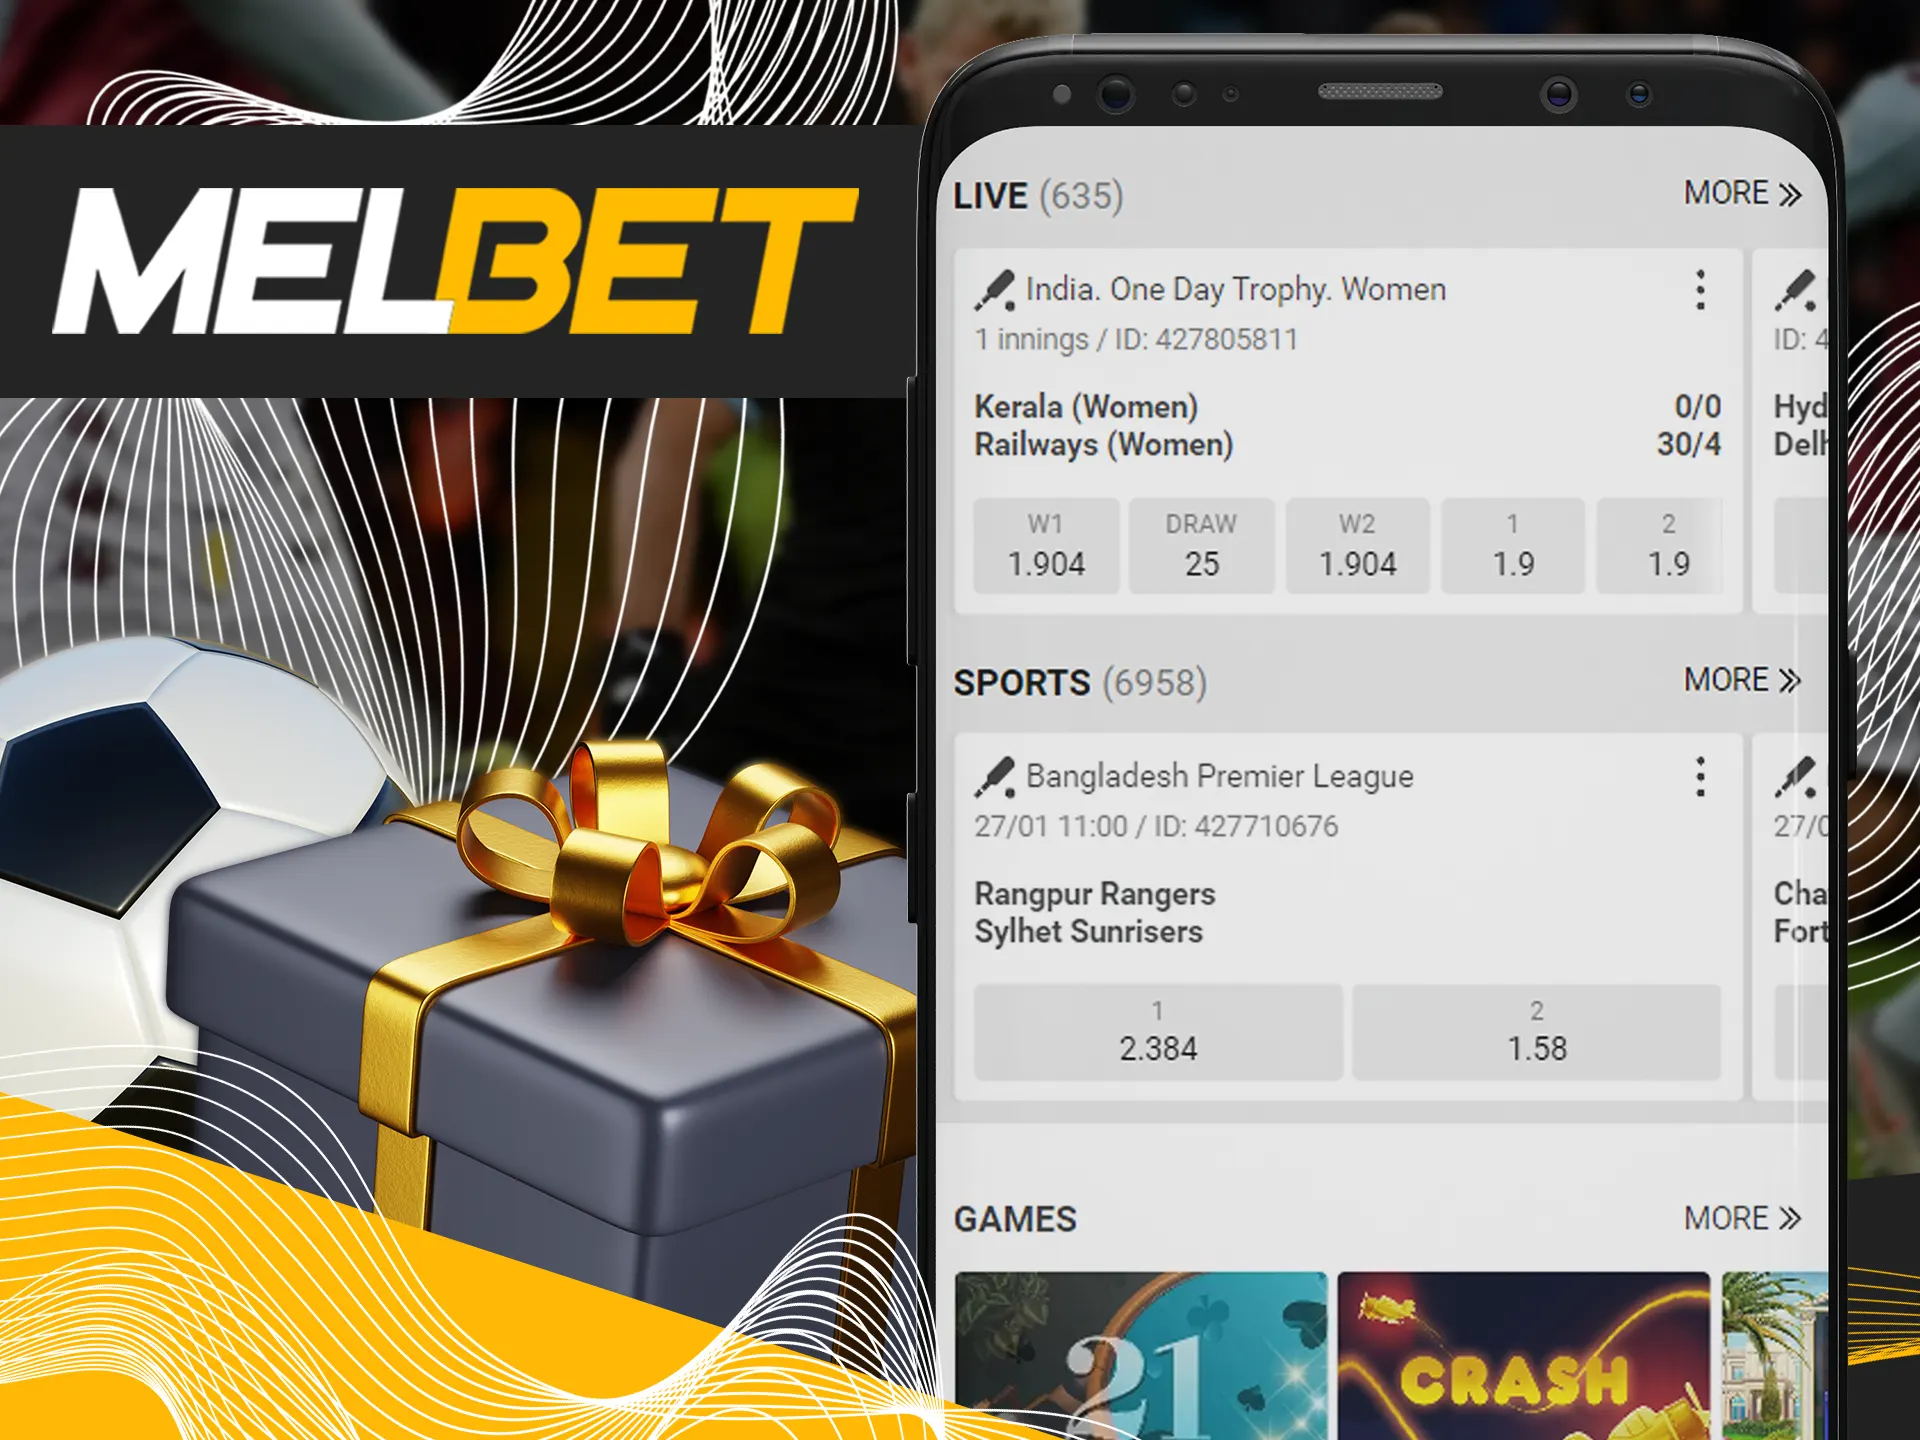 Make first deposit and get your Melbet welcome bonus.